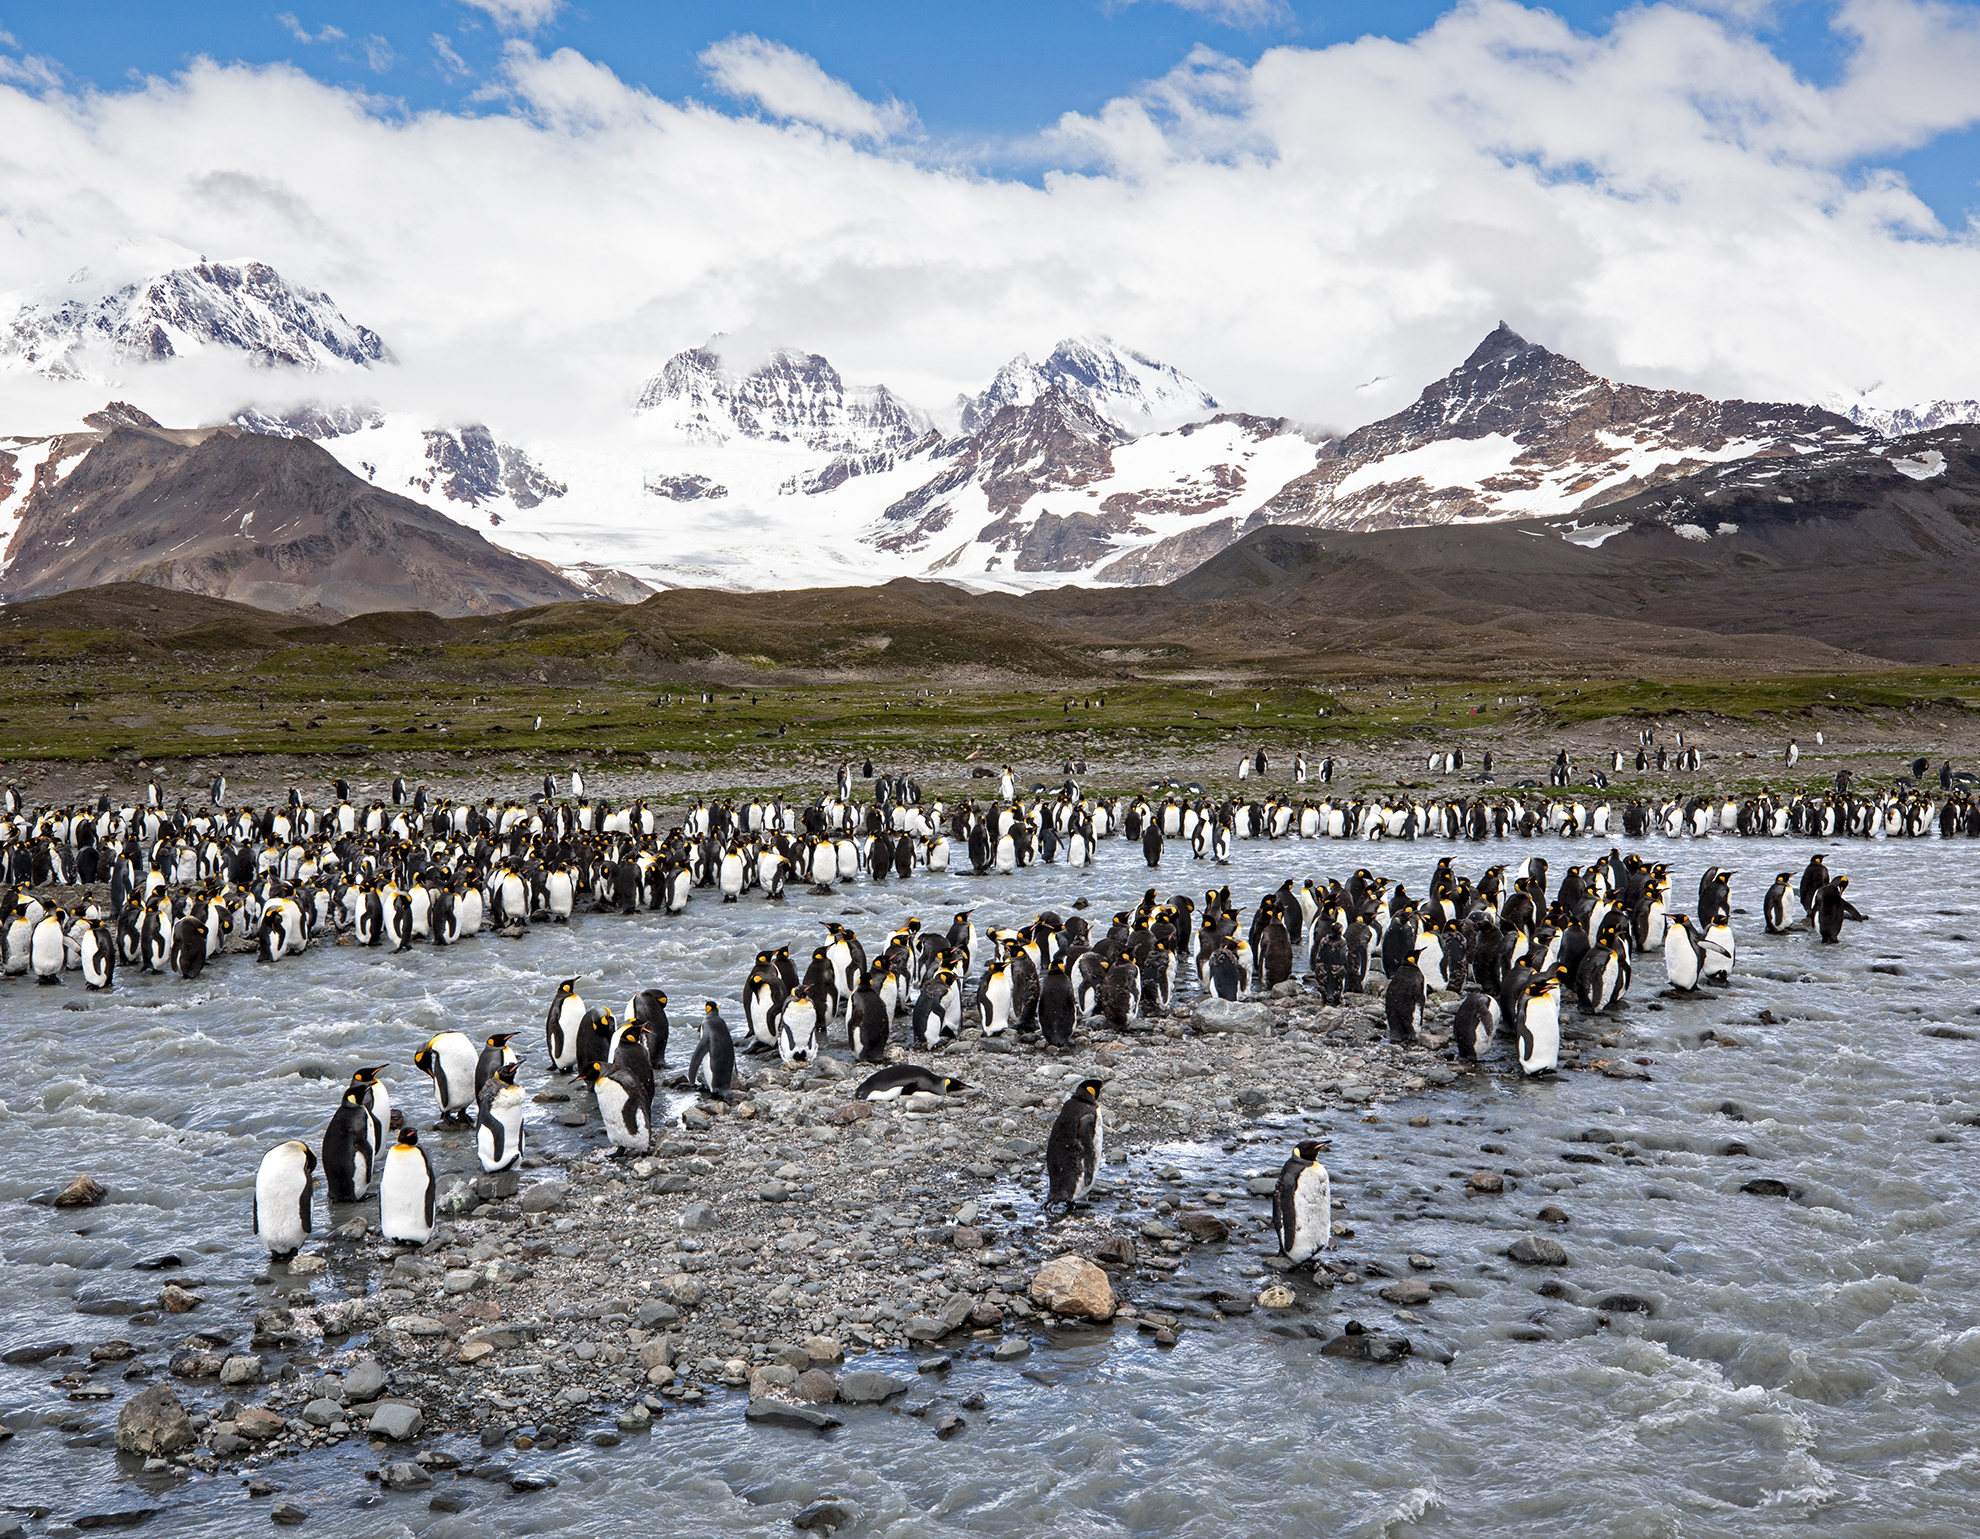 Landscape image of the largest king penguin colony in the world